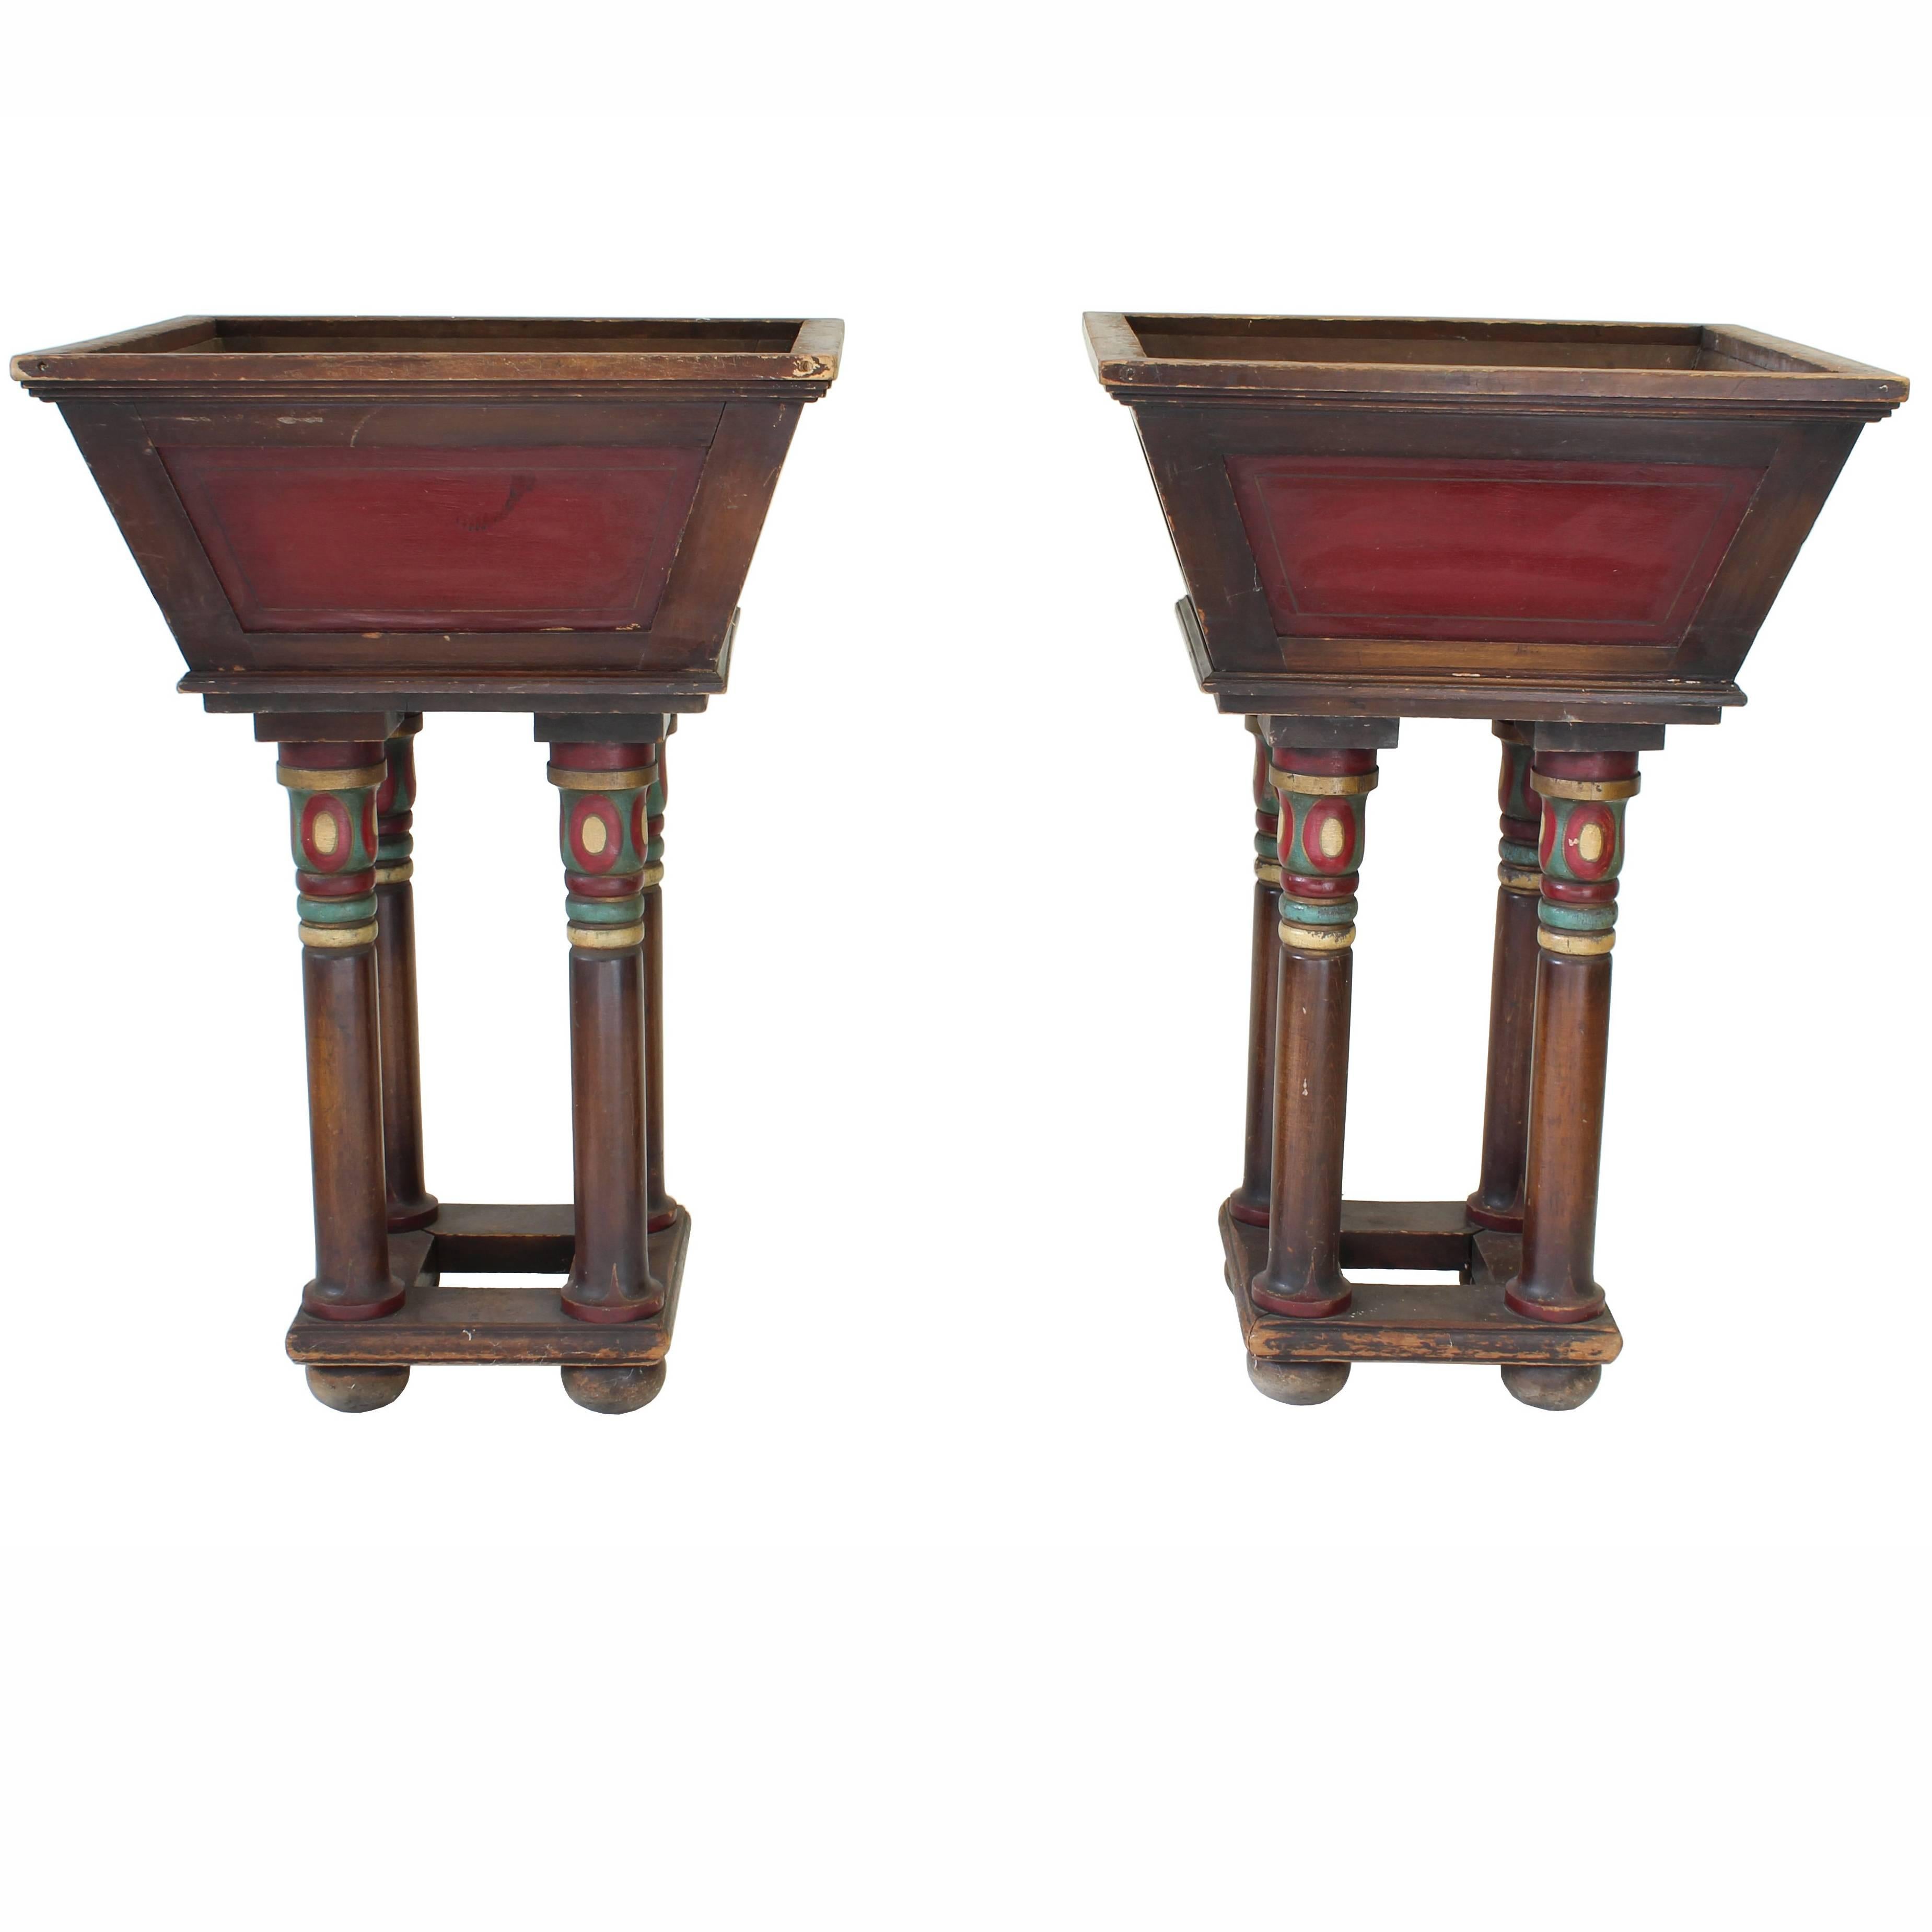 Pair of Hand-Painted Wood Pedestal Planters with Red Inset Panel For Sale